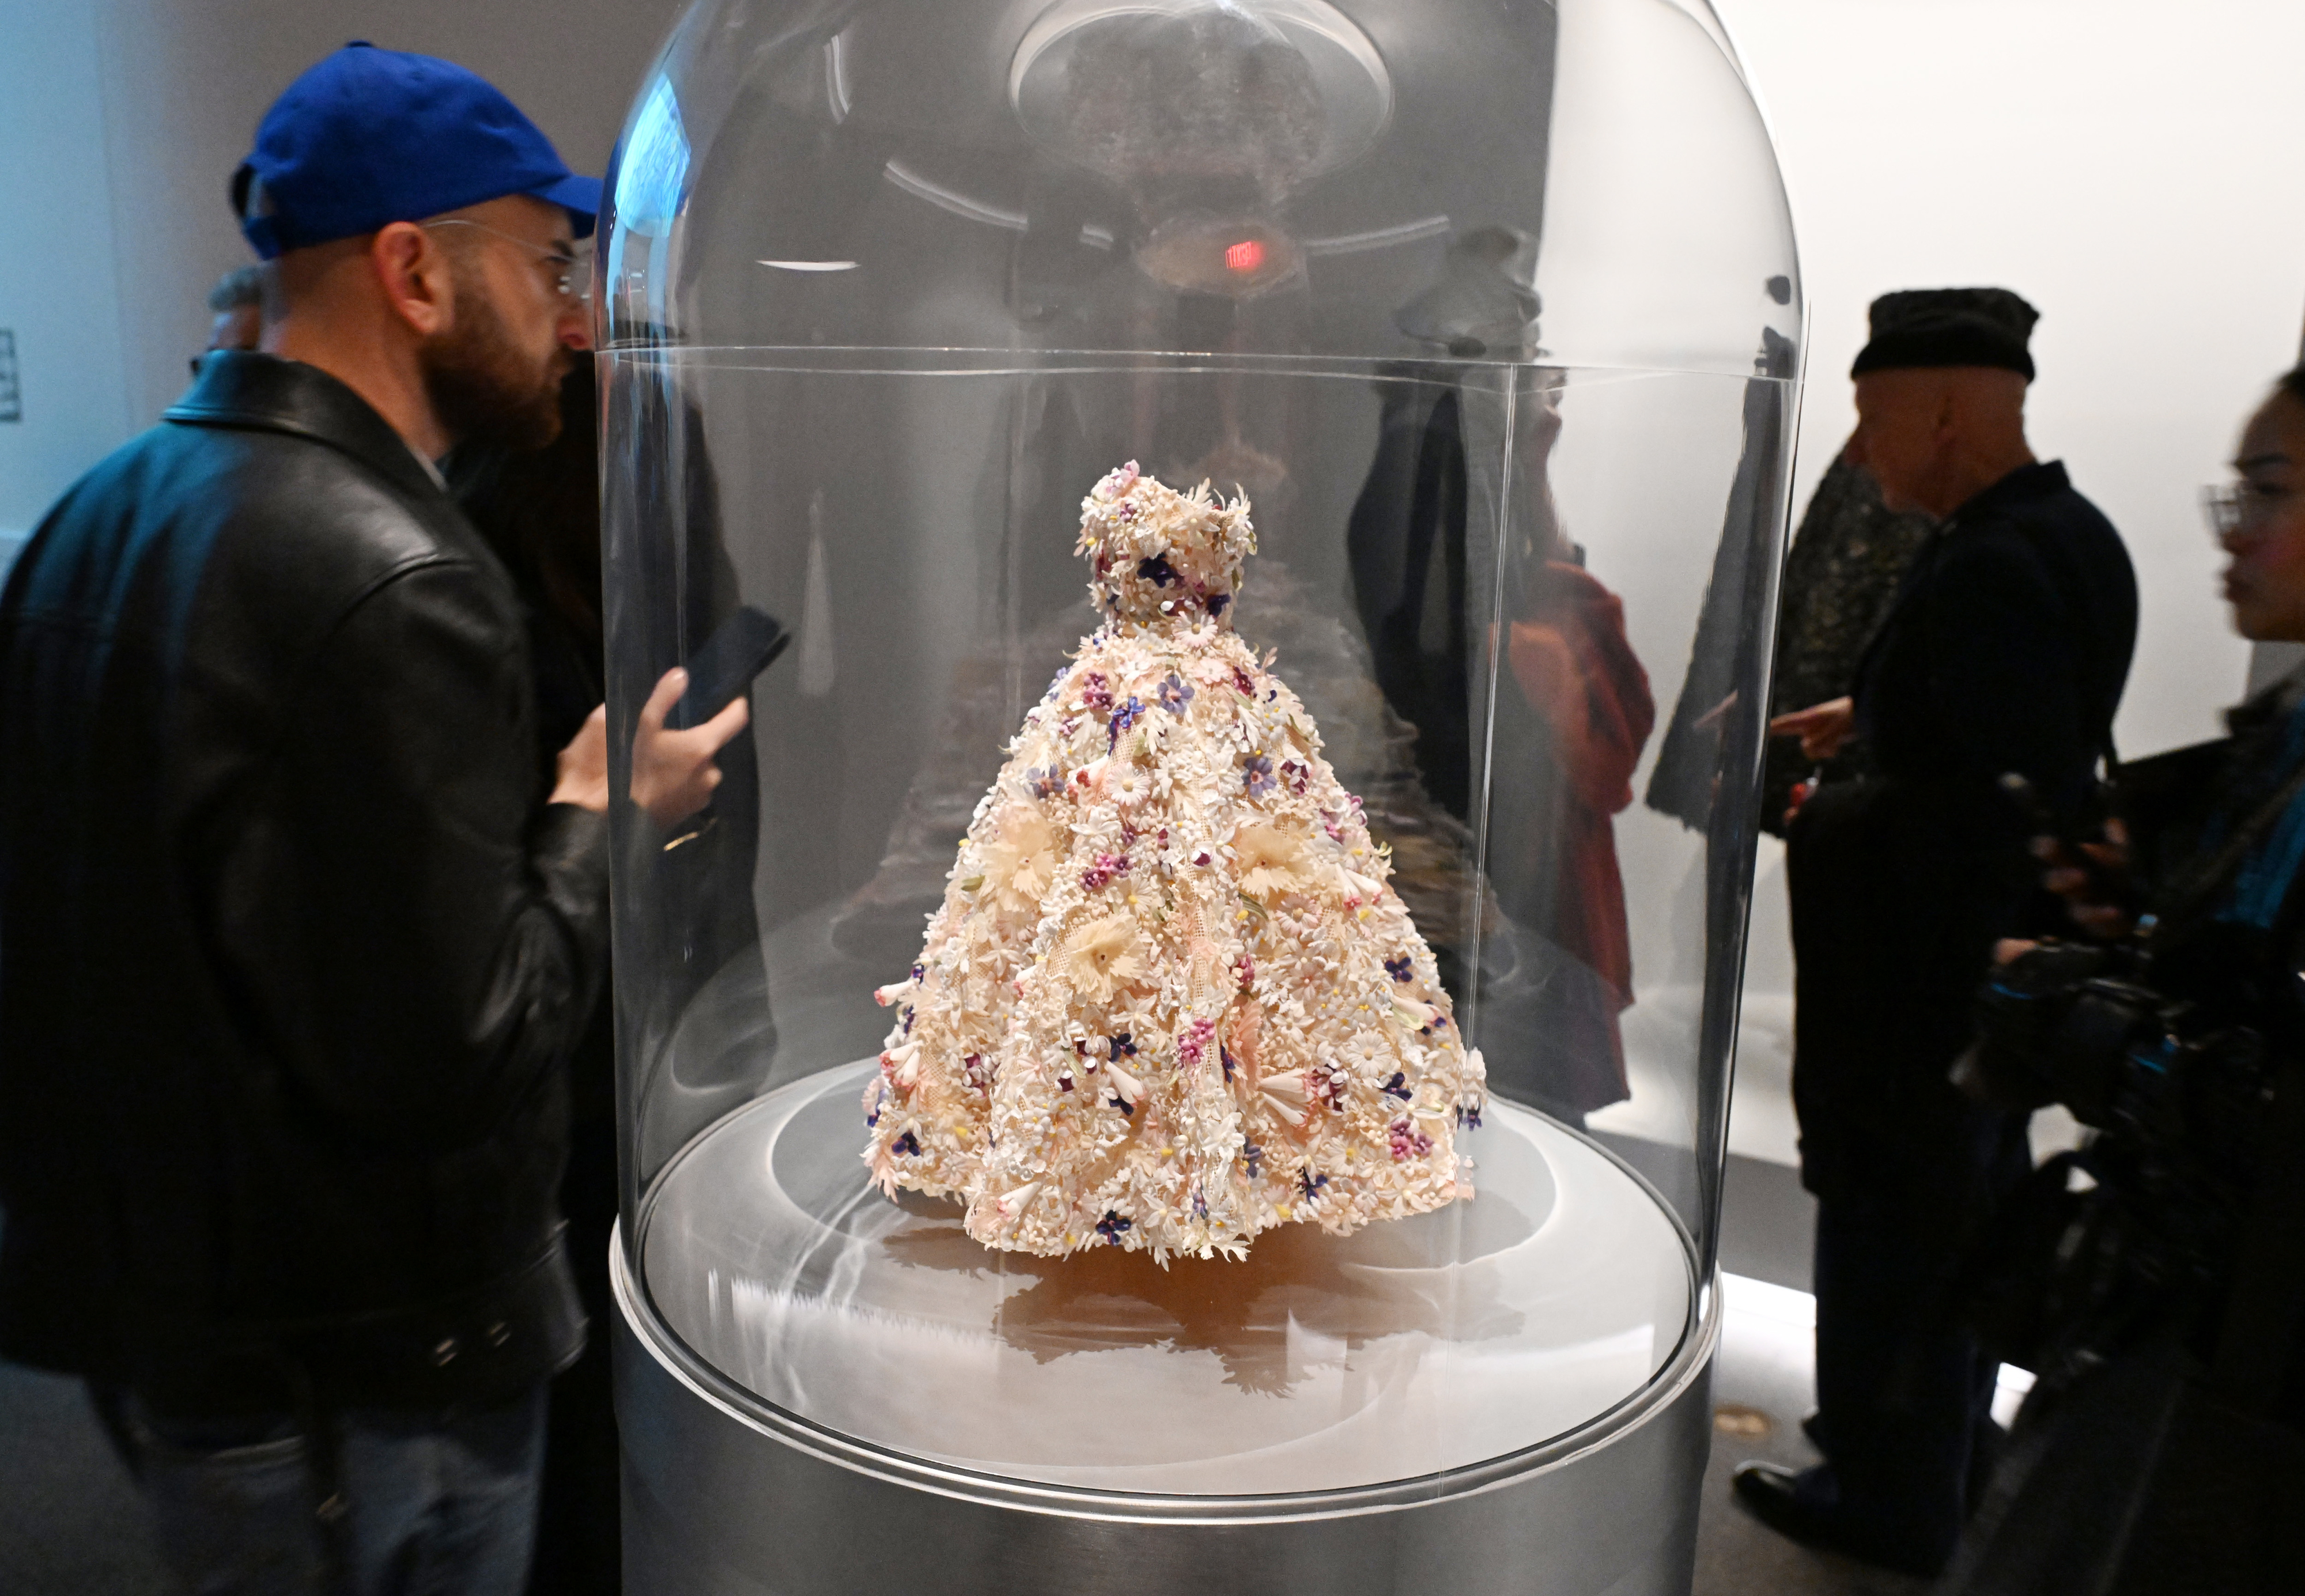 Man viewing a glass-enclosed ornate gown on display. No persons in the image are identifiable